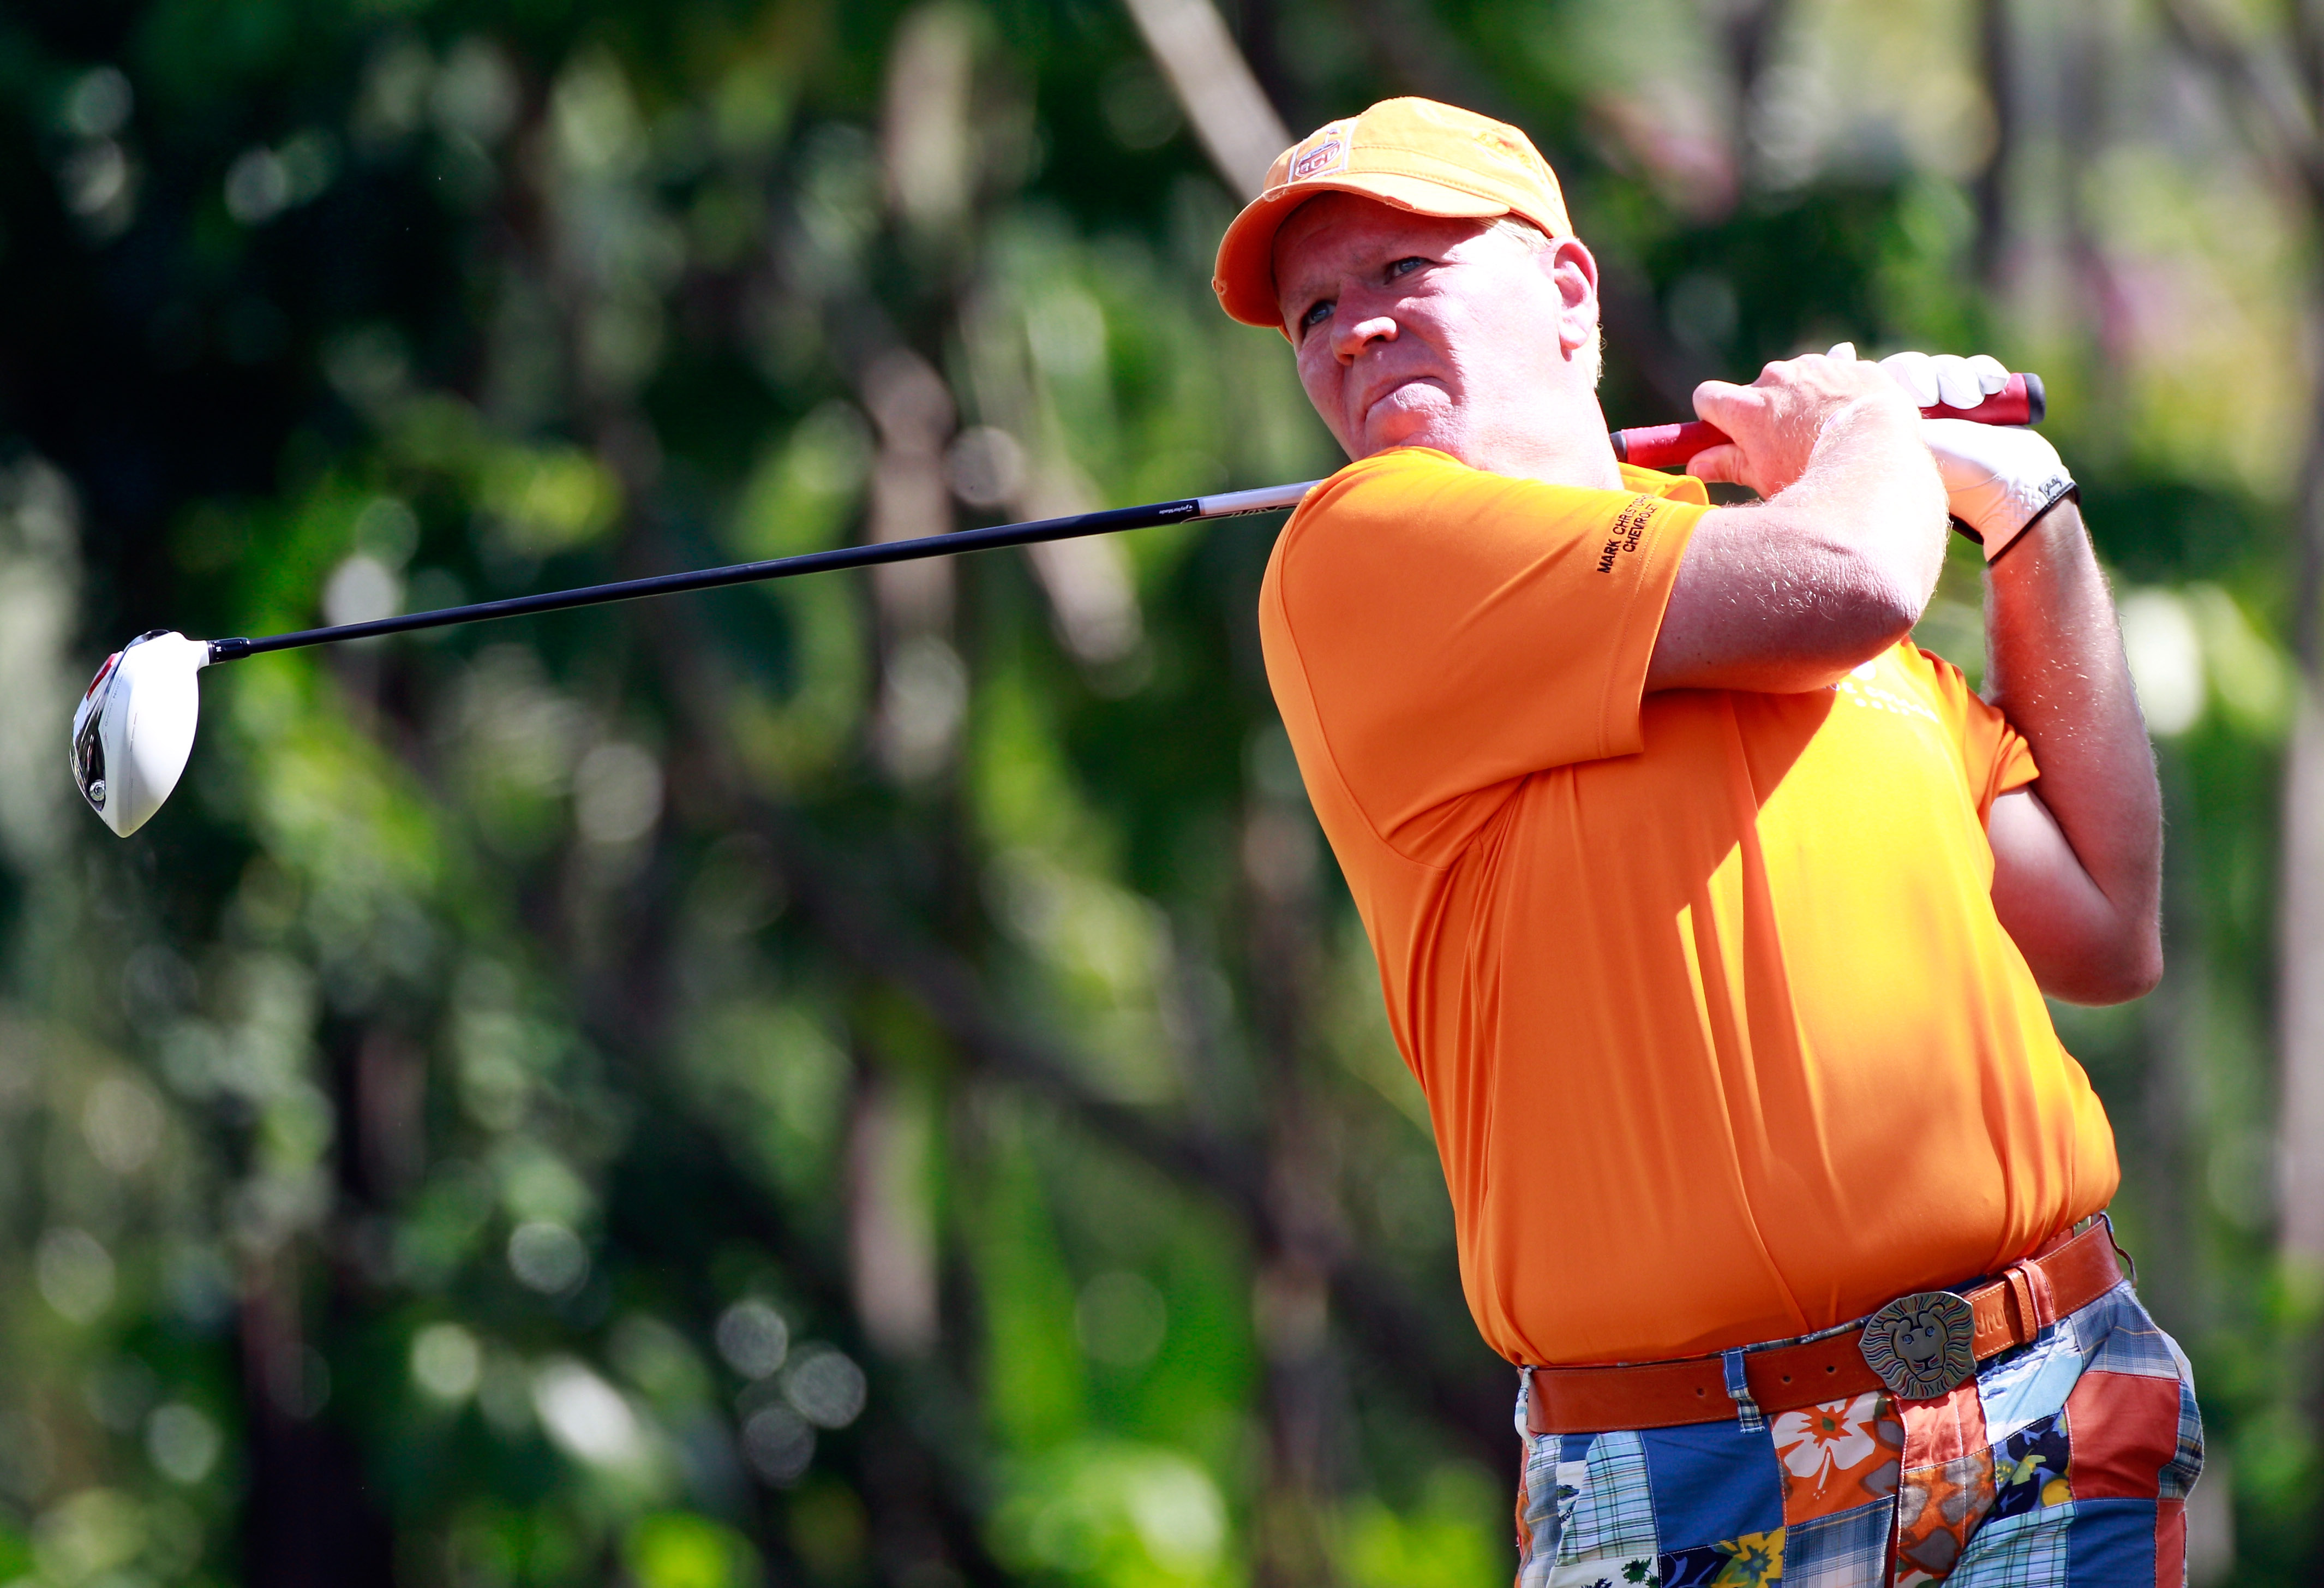 HONOLULU, HI - JANUARY 14:  John Daly hits a shot during the first round of the Sony Open at Waialae Country Club on January 14, 2011 in Honolulu, Hawaii.  (Photo by Sam Greenwood/Getty Images)